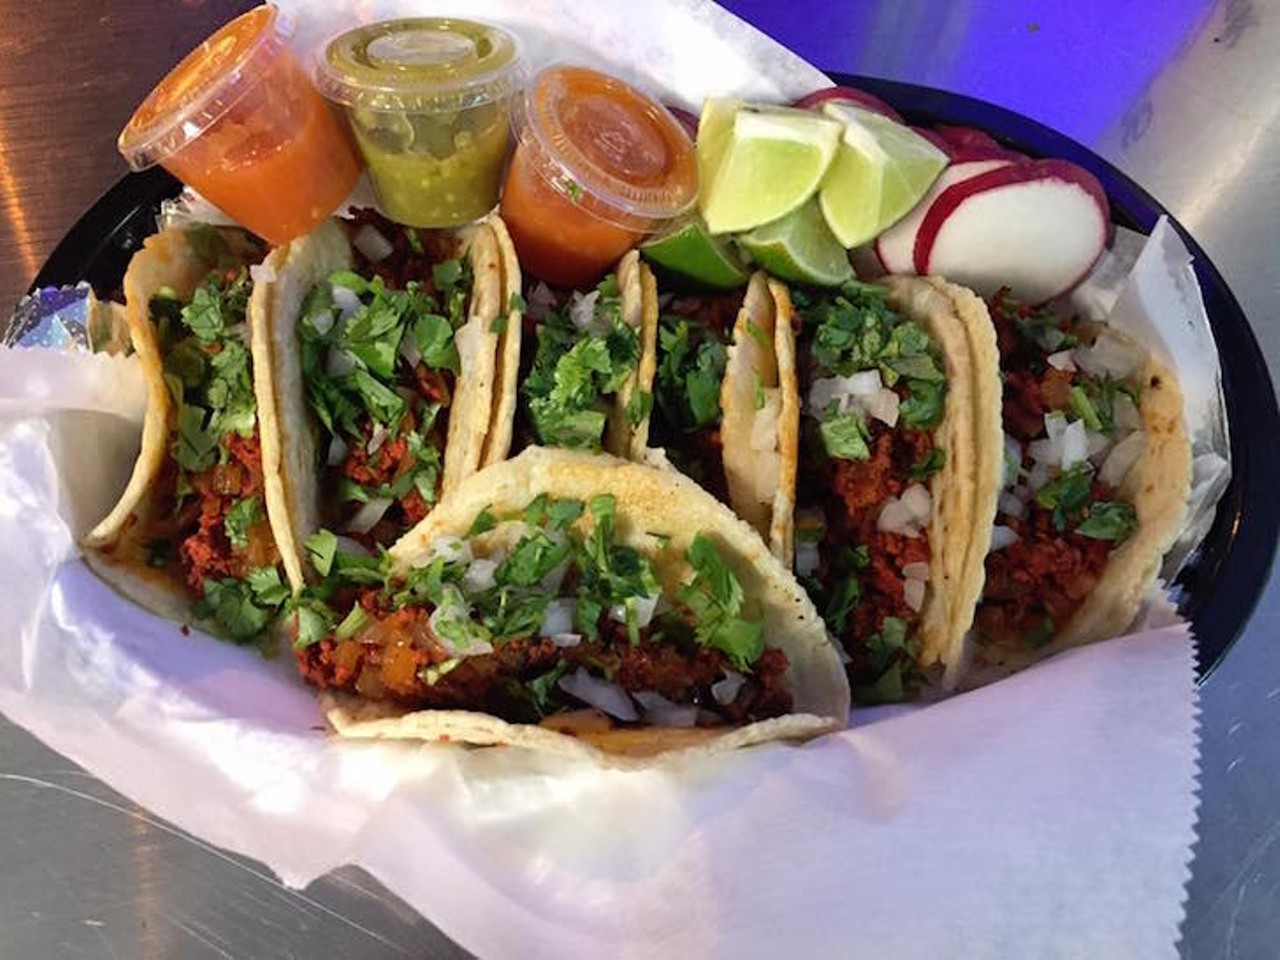 Taquer&iacute;a L.A. Tacos
1404 E. Silver Star Road, Ocoee, 407-715-9496,
"Califas-style" street tacos have never looked better. Taquer&iacute;a L.A. Tacos fills up the gas station parking lot where they stay by serving tacos with carne asada, chorizo, lengua, tripa, buche and our favorite &#150; sweet, red-tinged al pastor pork with onions, cilantro and a tingly lime salsa wrapped up in handmade tortillas.
Photo via Taqueria L.A. Tacos/Facebook